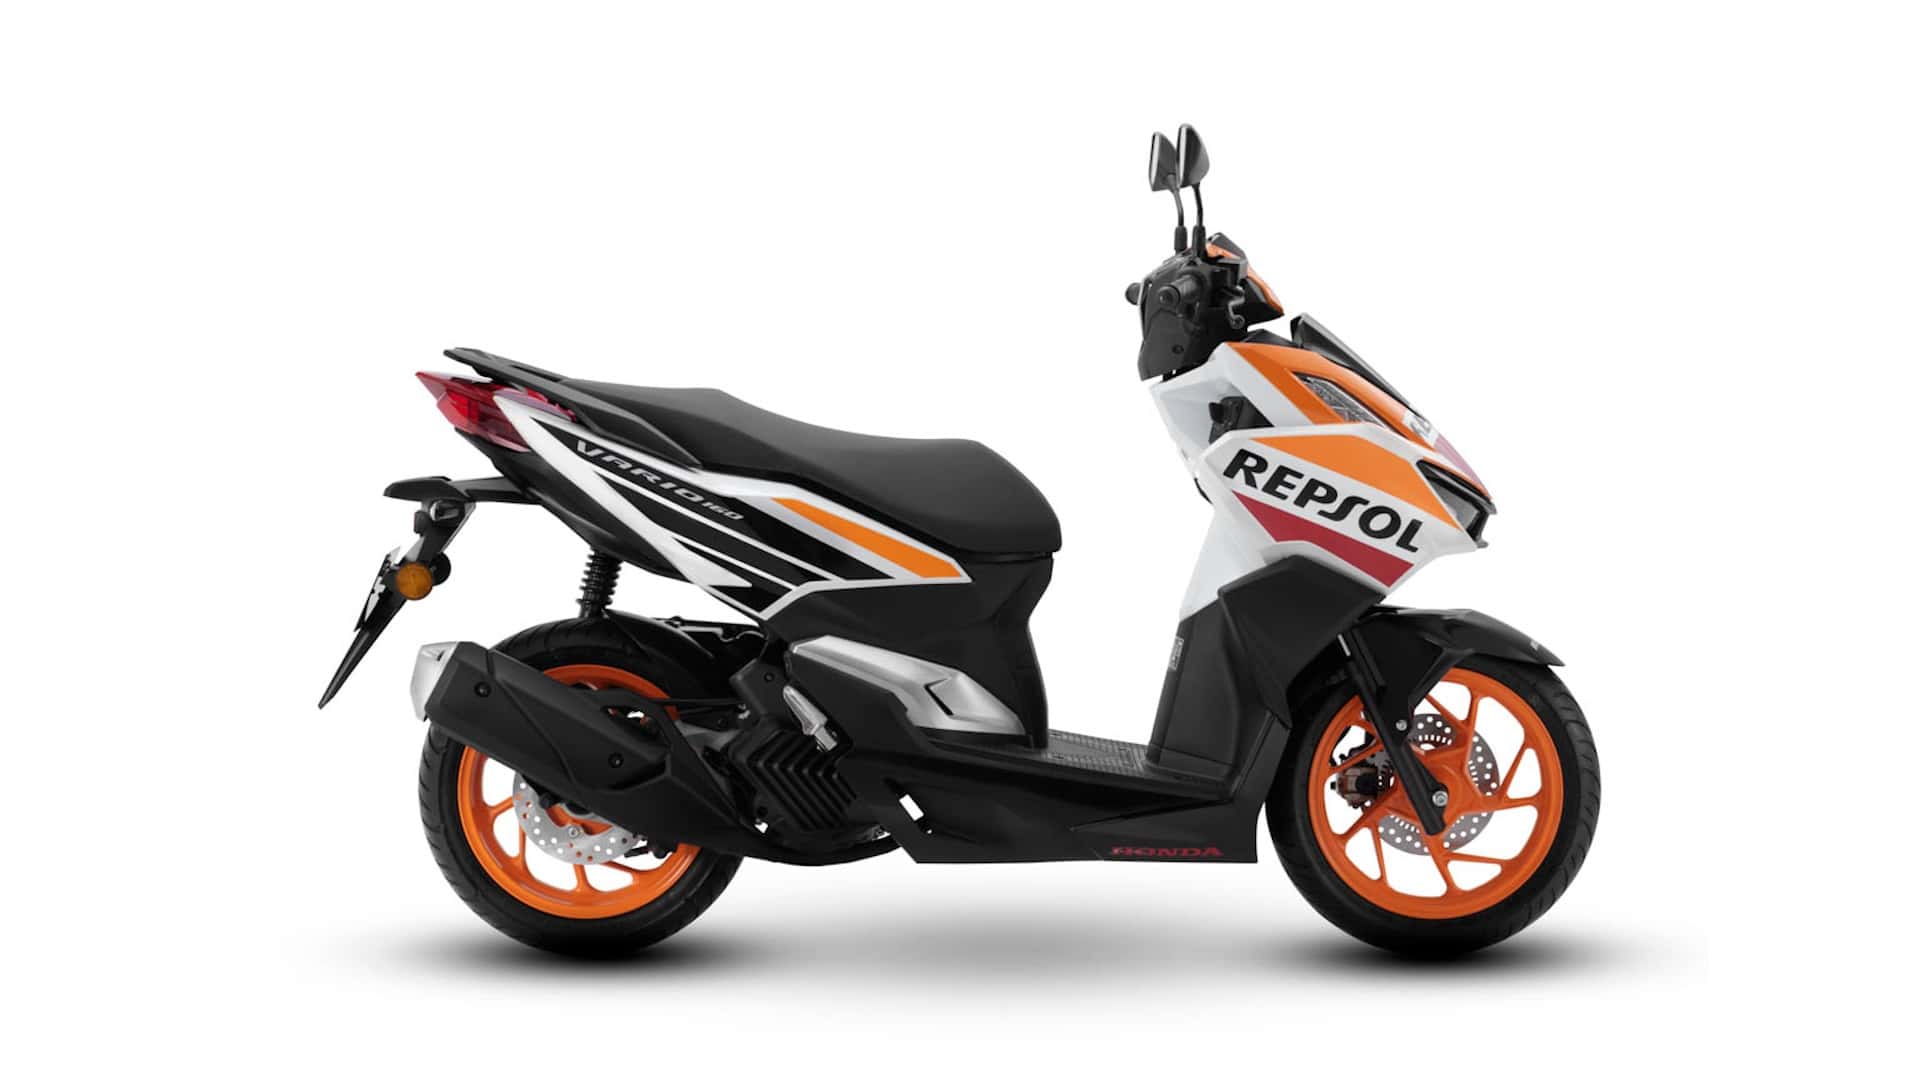 honda presents the sporty vario 160 repsol limited edition in malaysia 2